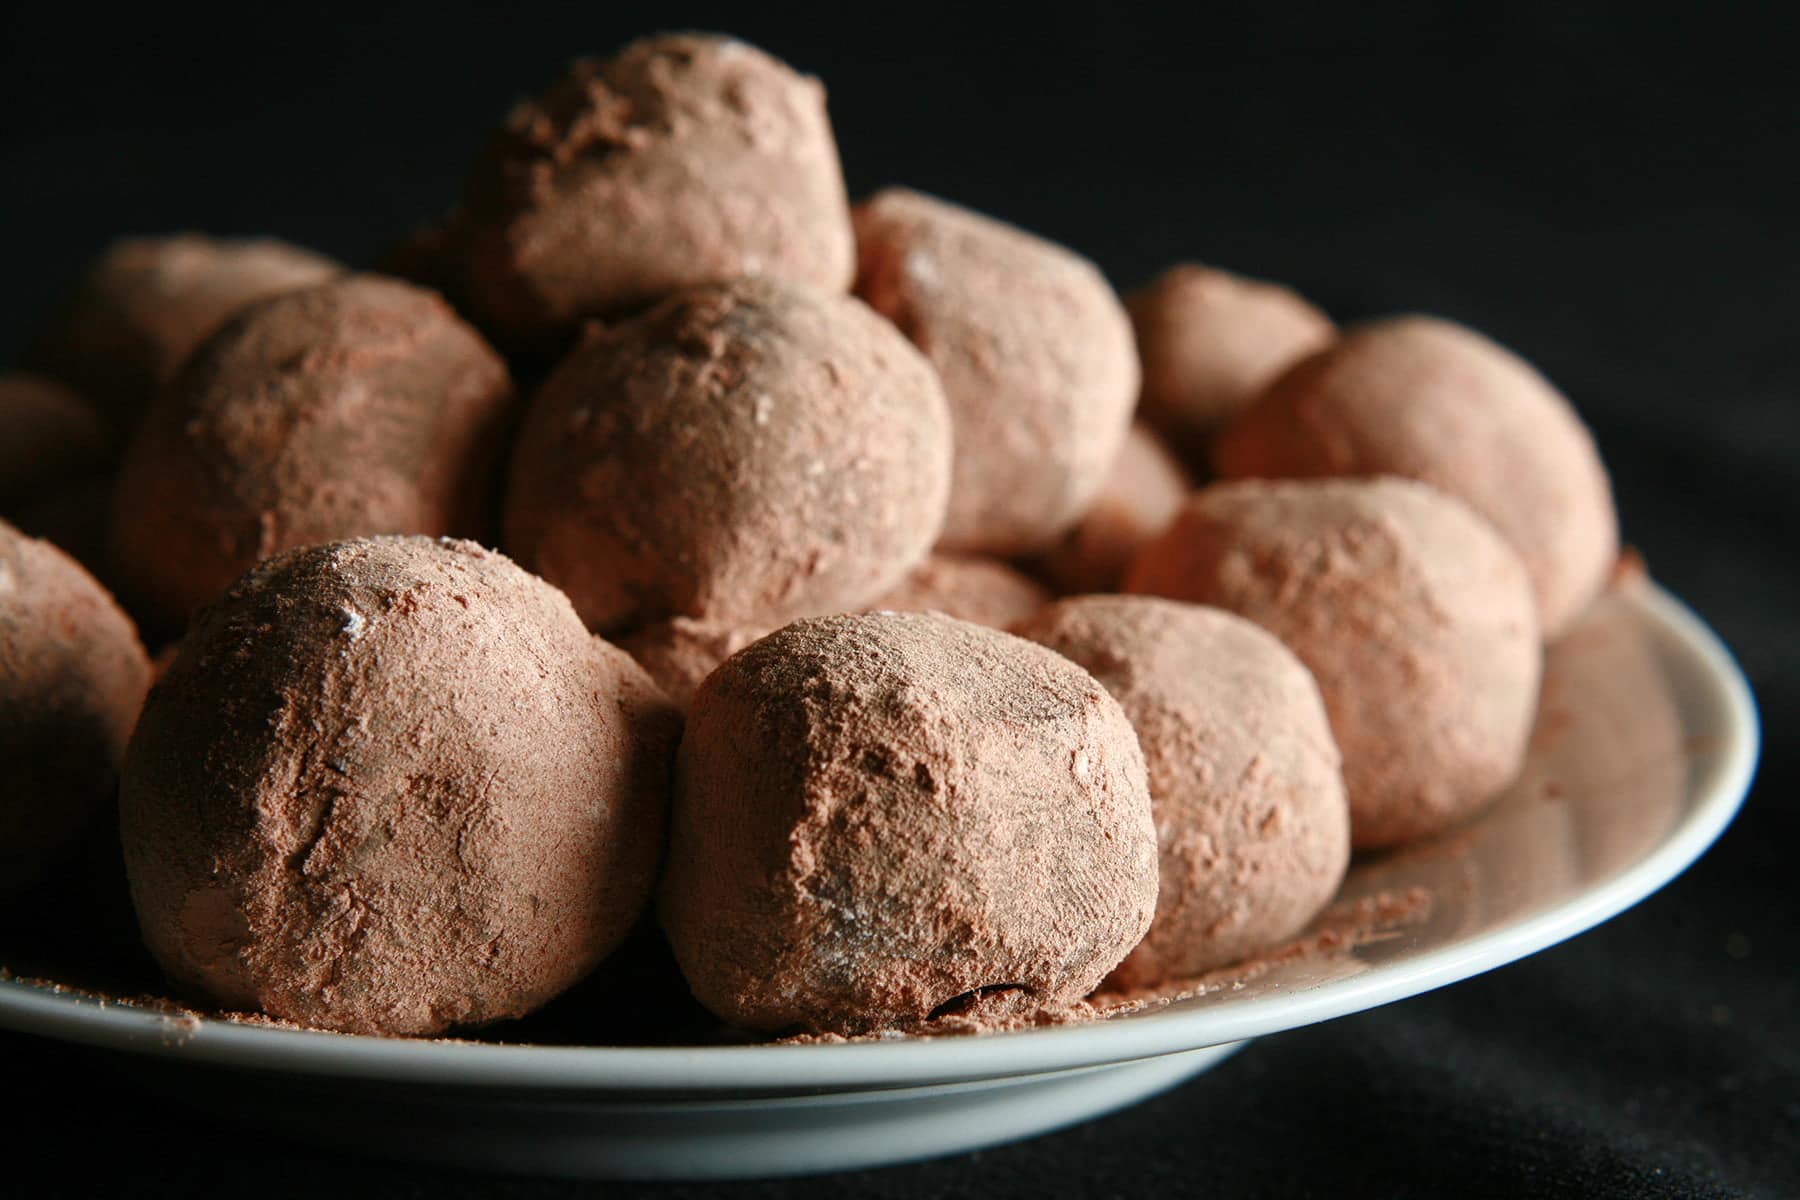 A small plate with a pile of cocoa-coated milk chocolate chai truffles.